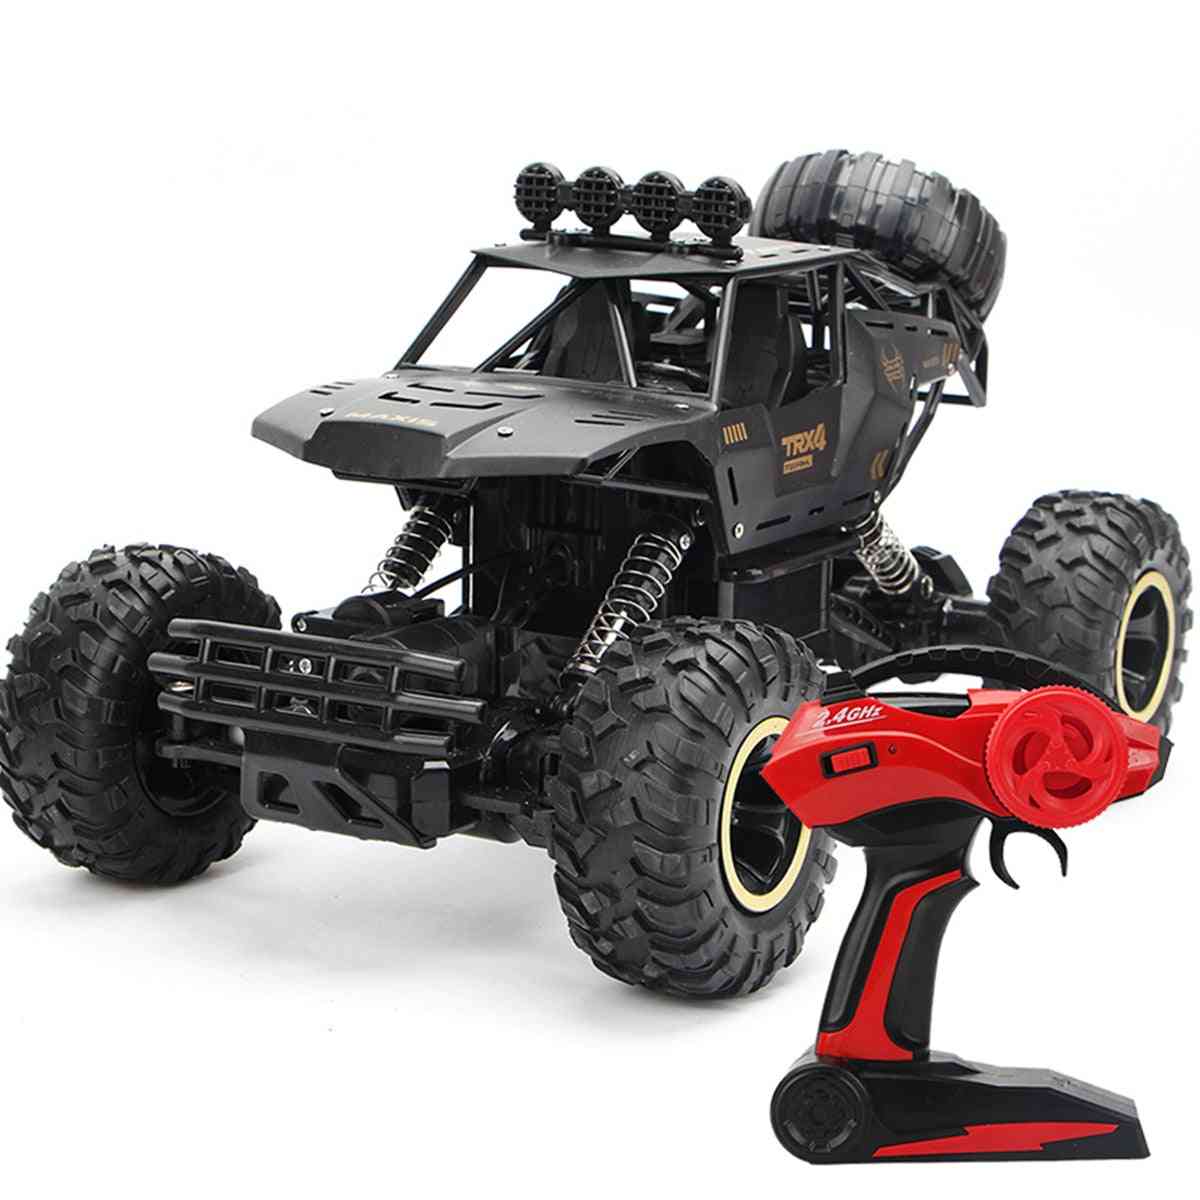 4WD RC Monster Truck Pojazd terenowy 2.4G z pilotem Buggy Crawler Car Hot